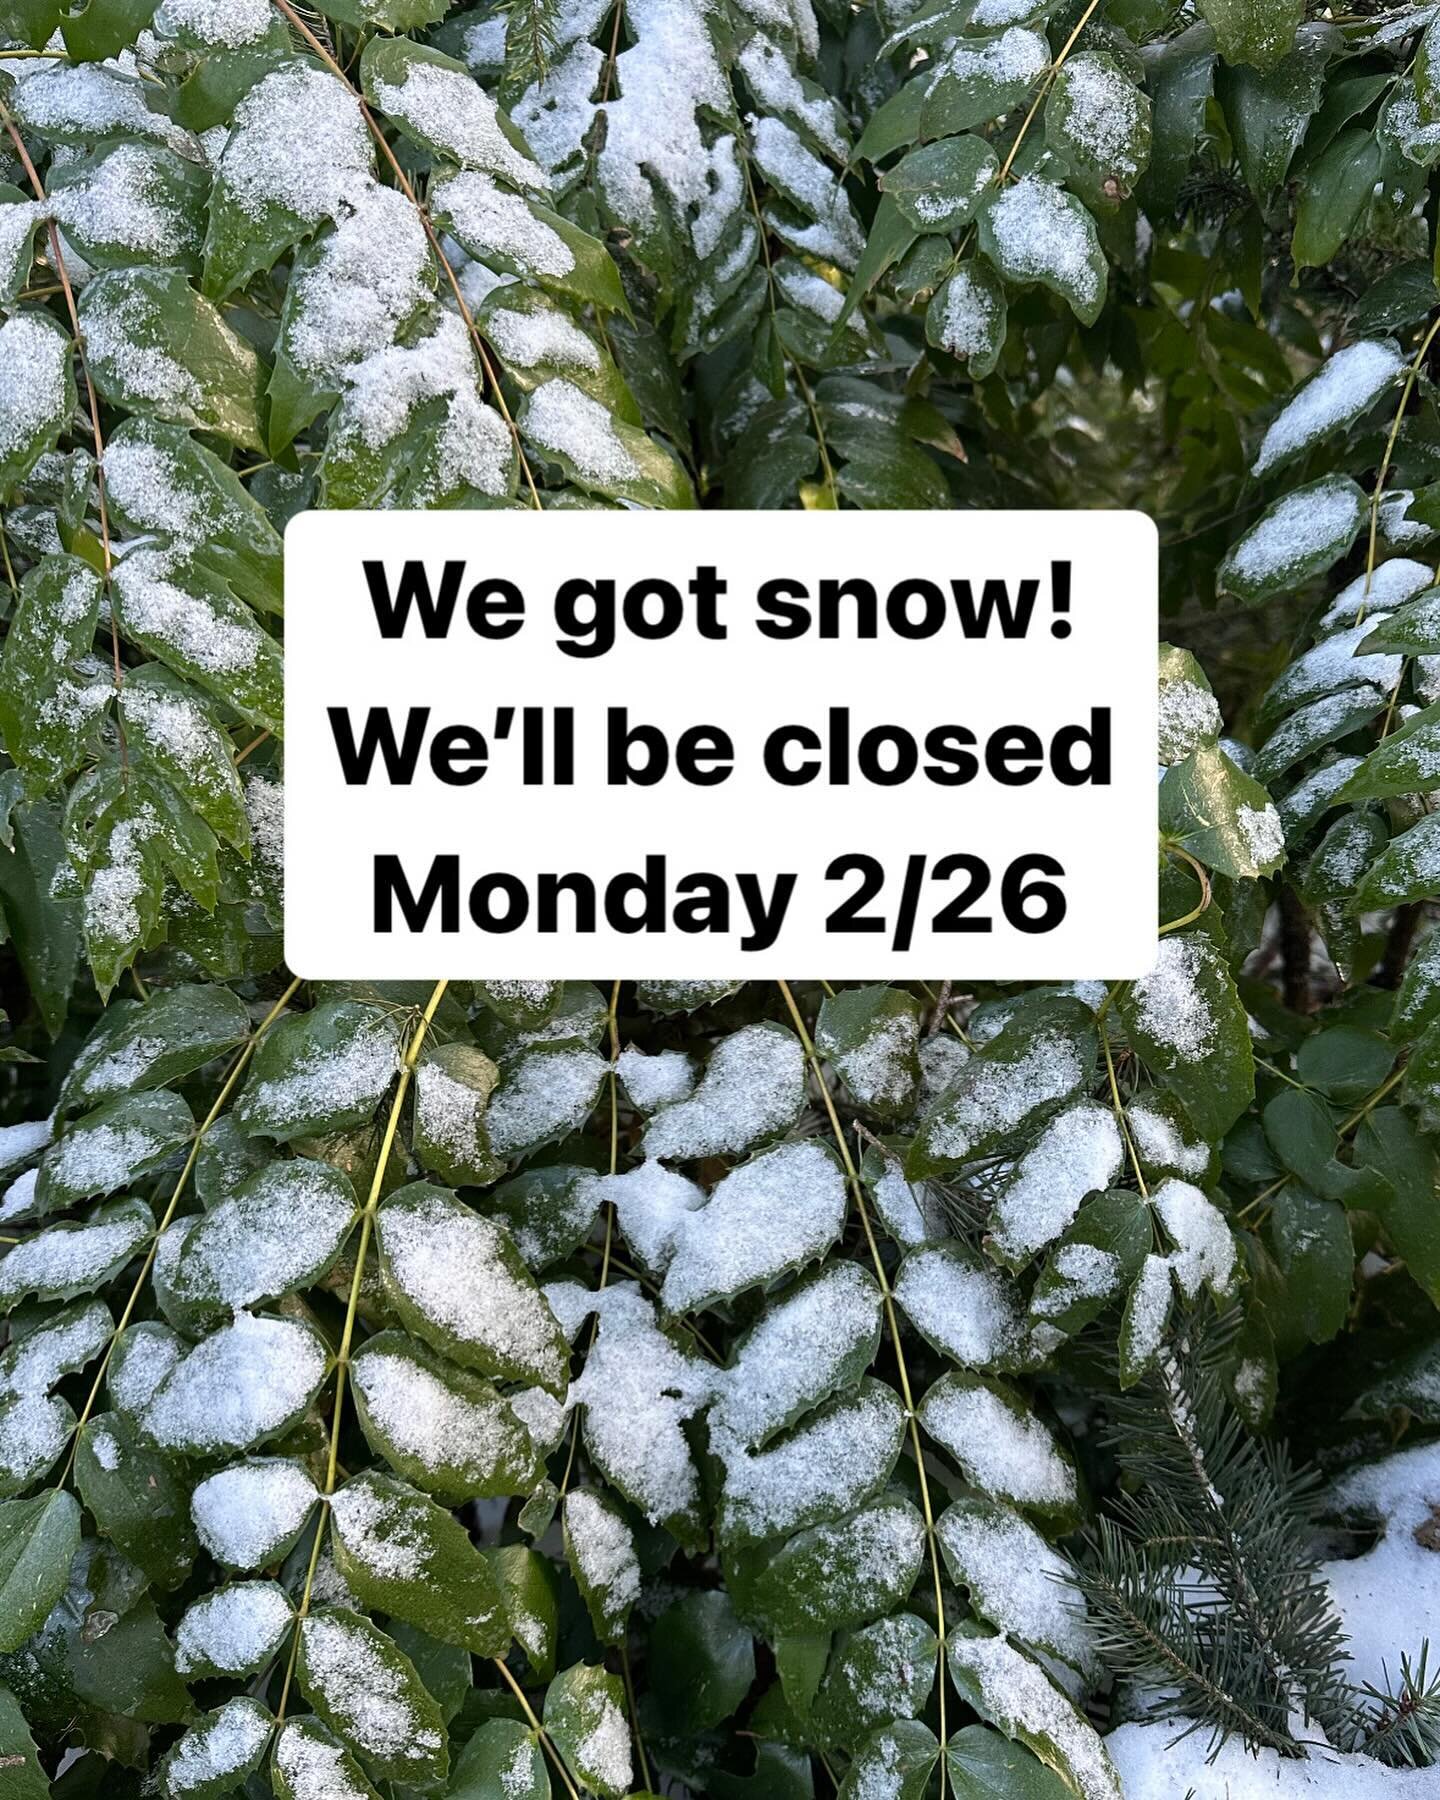 Back to a bit of winter after false spring! ❄️ 

We will be closed today, Monday 2/26 due to snow. It looks pretty cold all week, so it might be a good idea to call before you drive out to verify our open hours!